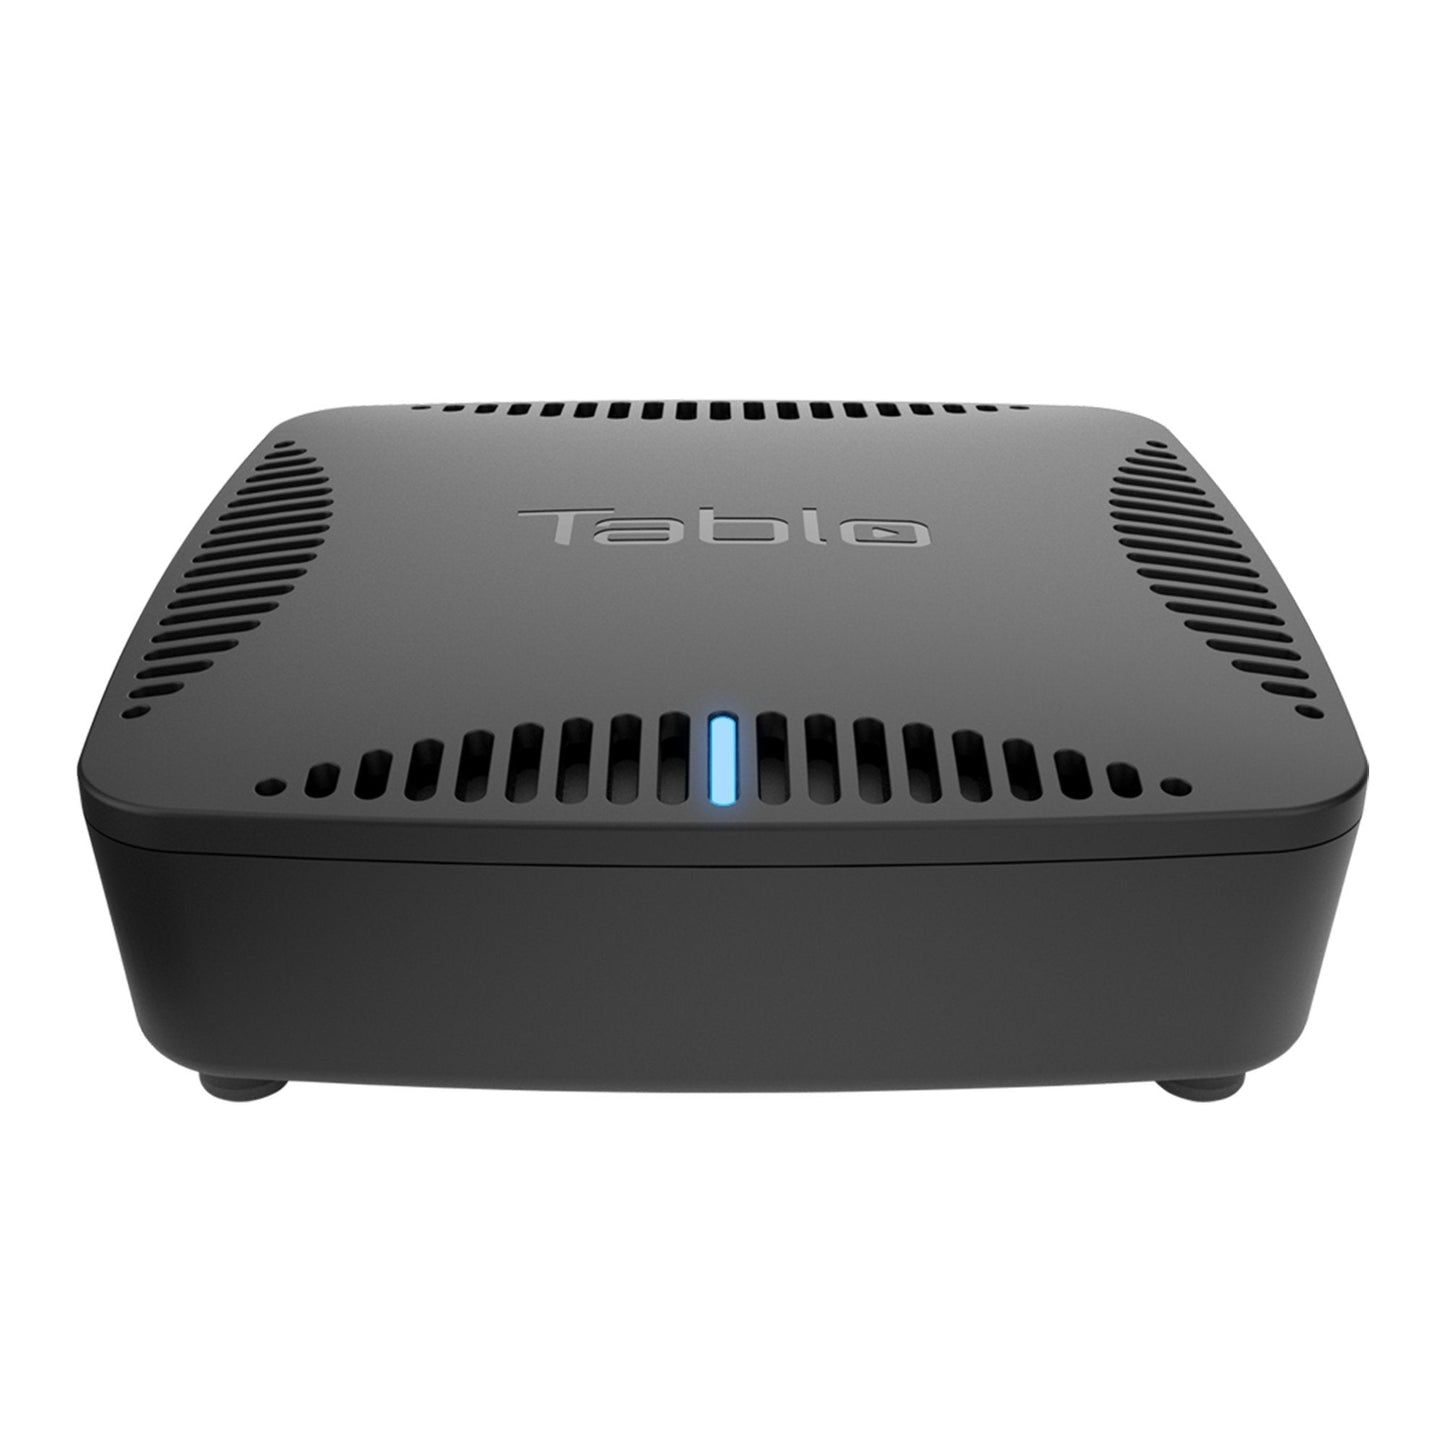 Tablo DUAL 128GB Over-The-Air (OTA) DVR (Digital Video Recorder) for Cord Cutters. DVR hardware front.